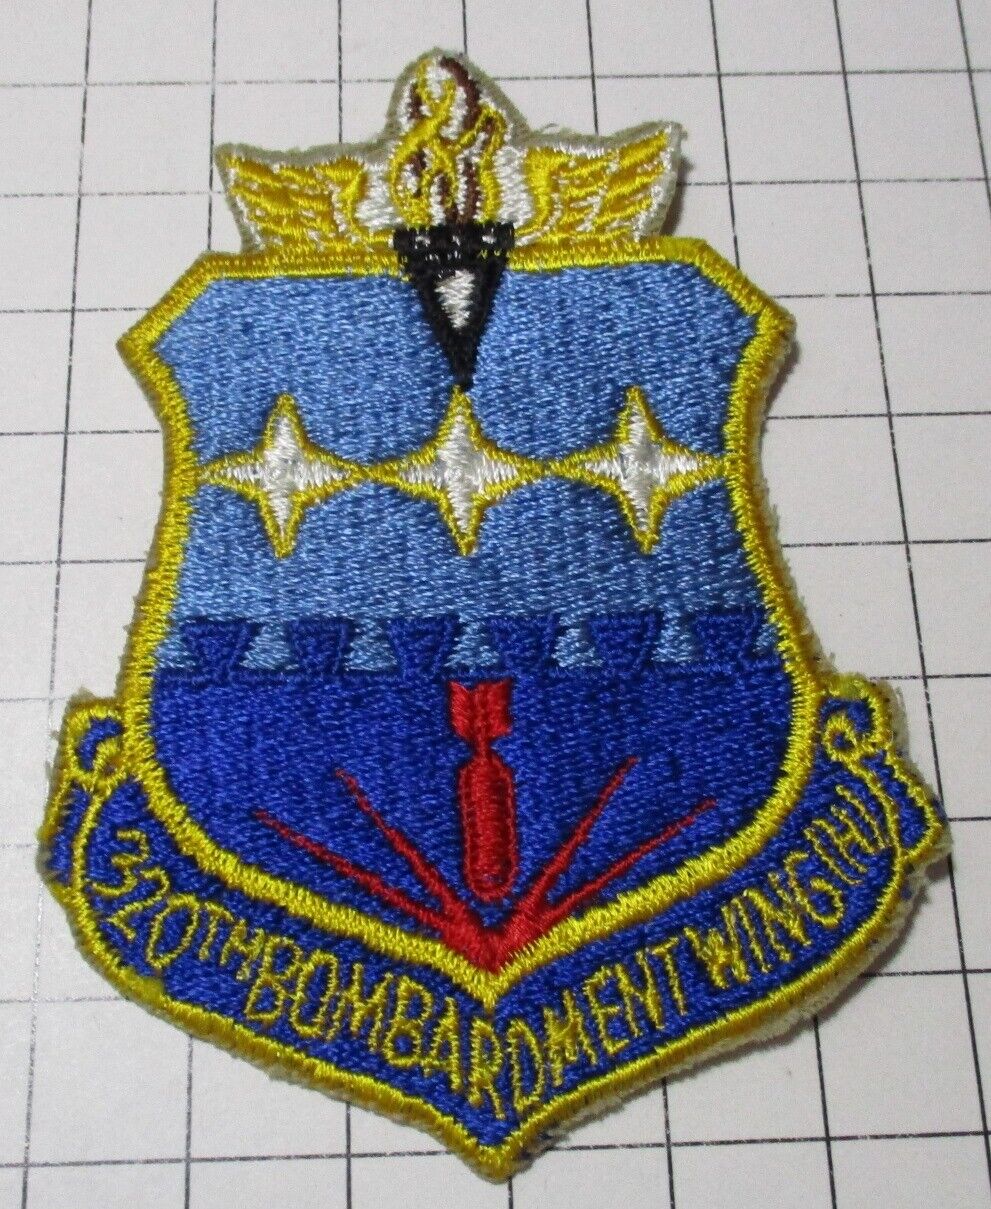 Usaf Air Force Military Patch 320th Bomb Wing (heavy) Sac B52 V1